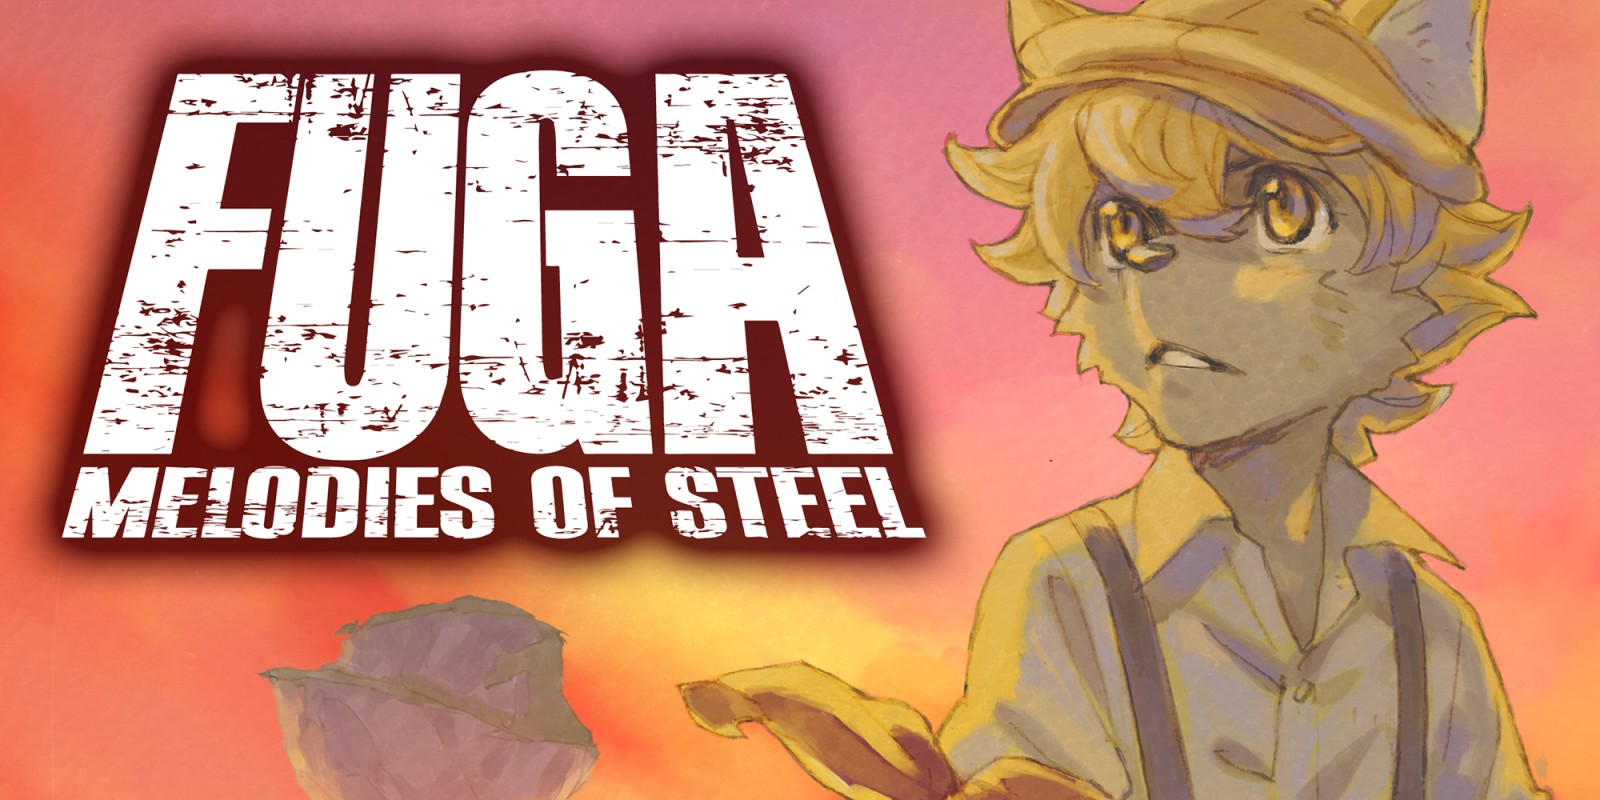 for windows download Fuga: Melodies of Steel 2